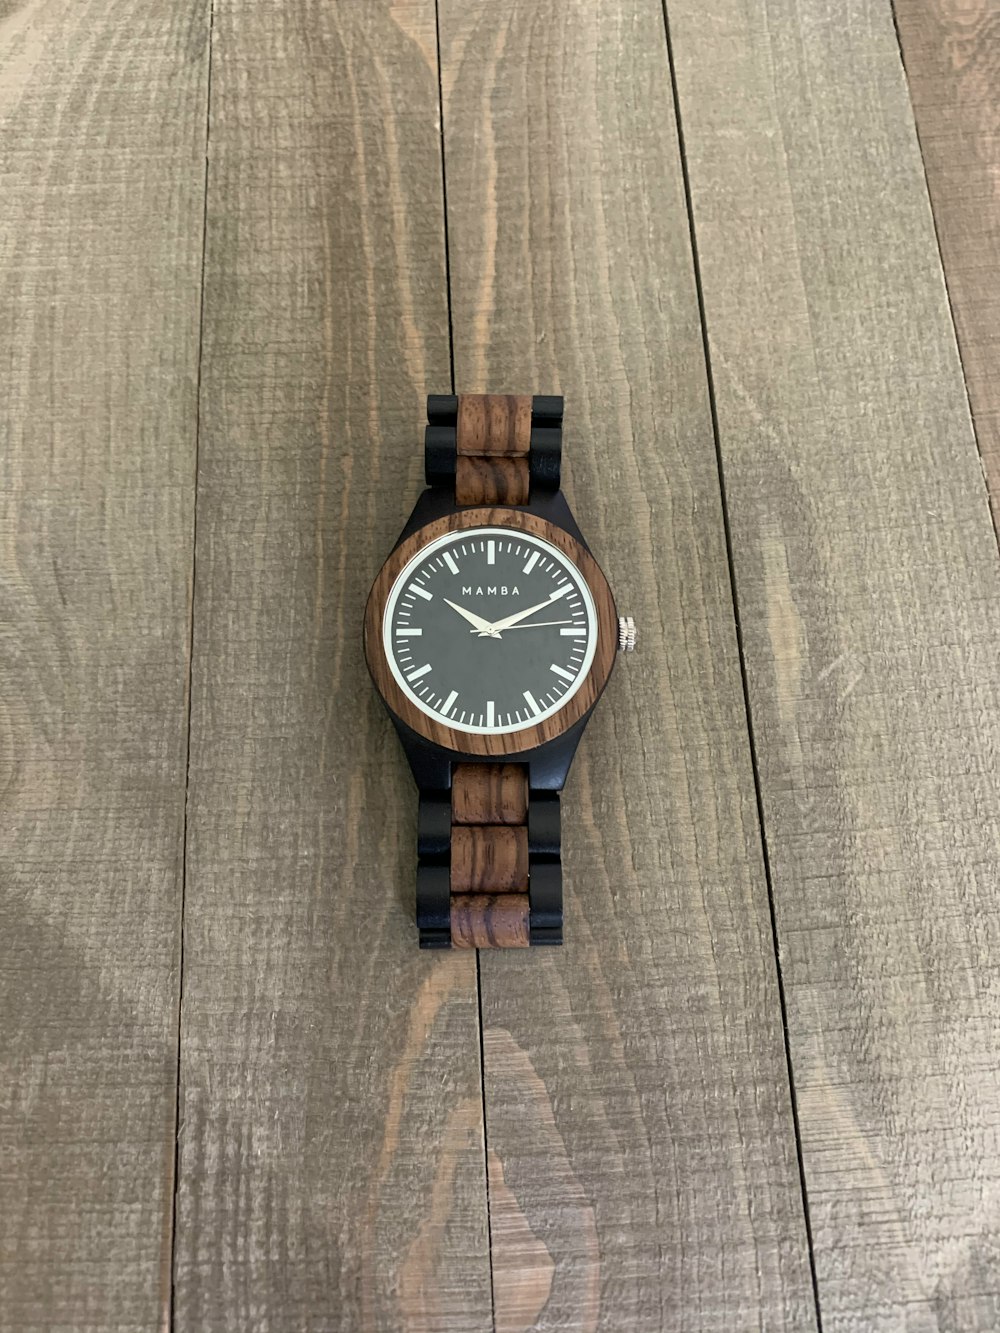 brown and white analog watch at 10 10